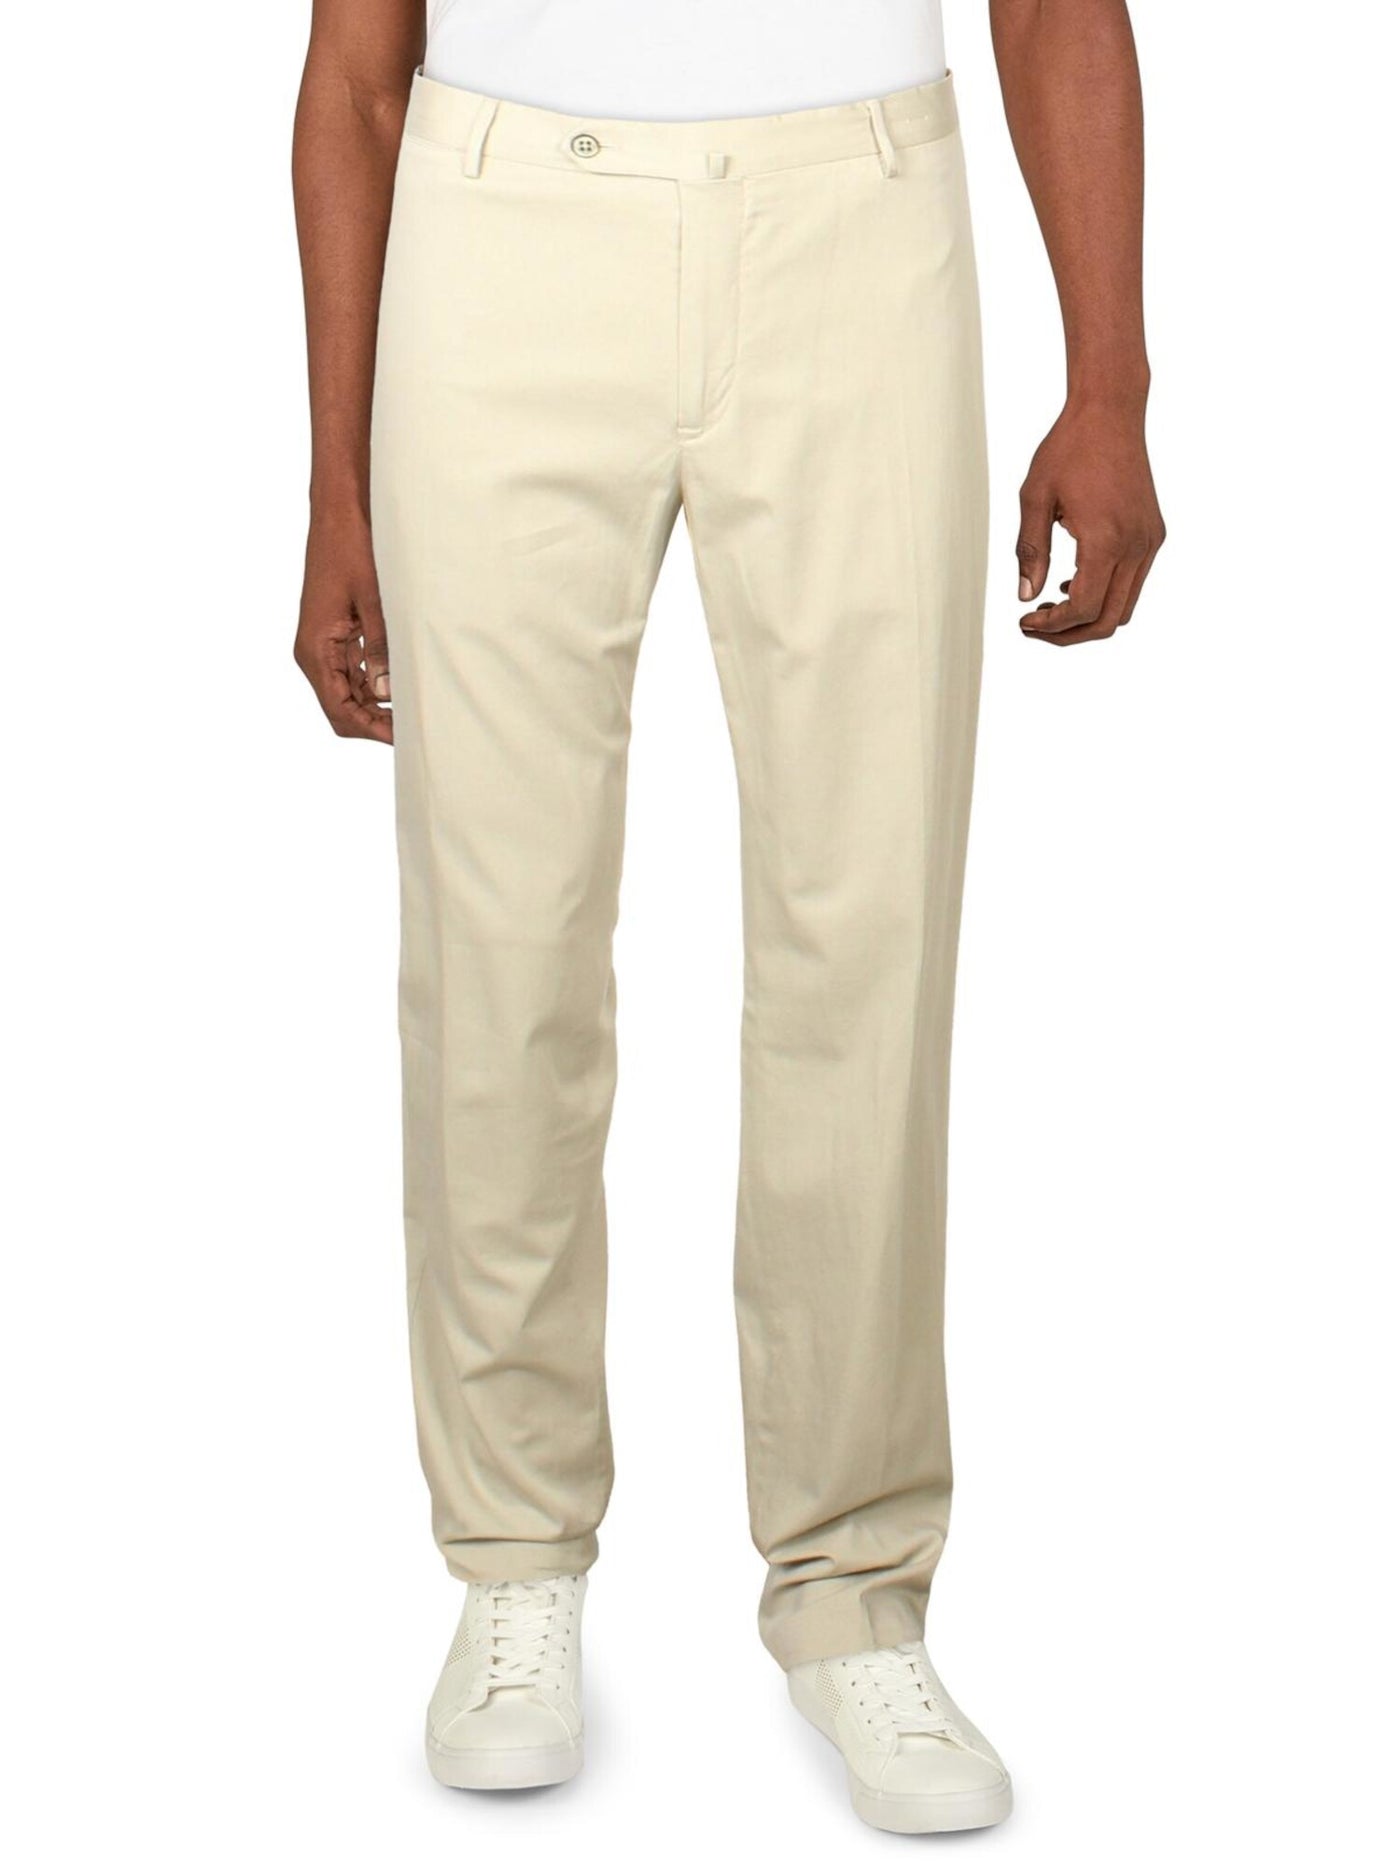 TORIN OPIFICIO Mens Beige Flat Front, Stretch, Stretch Chino Pants 54